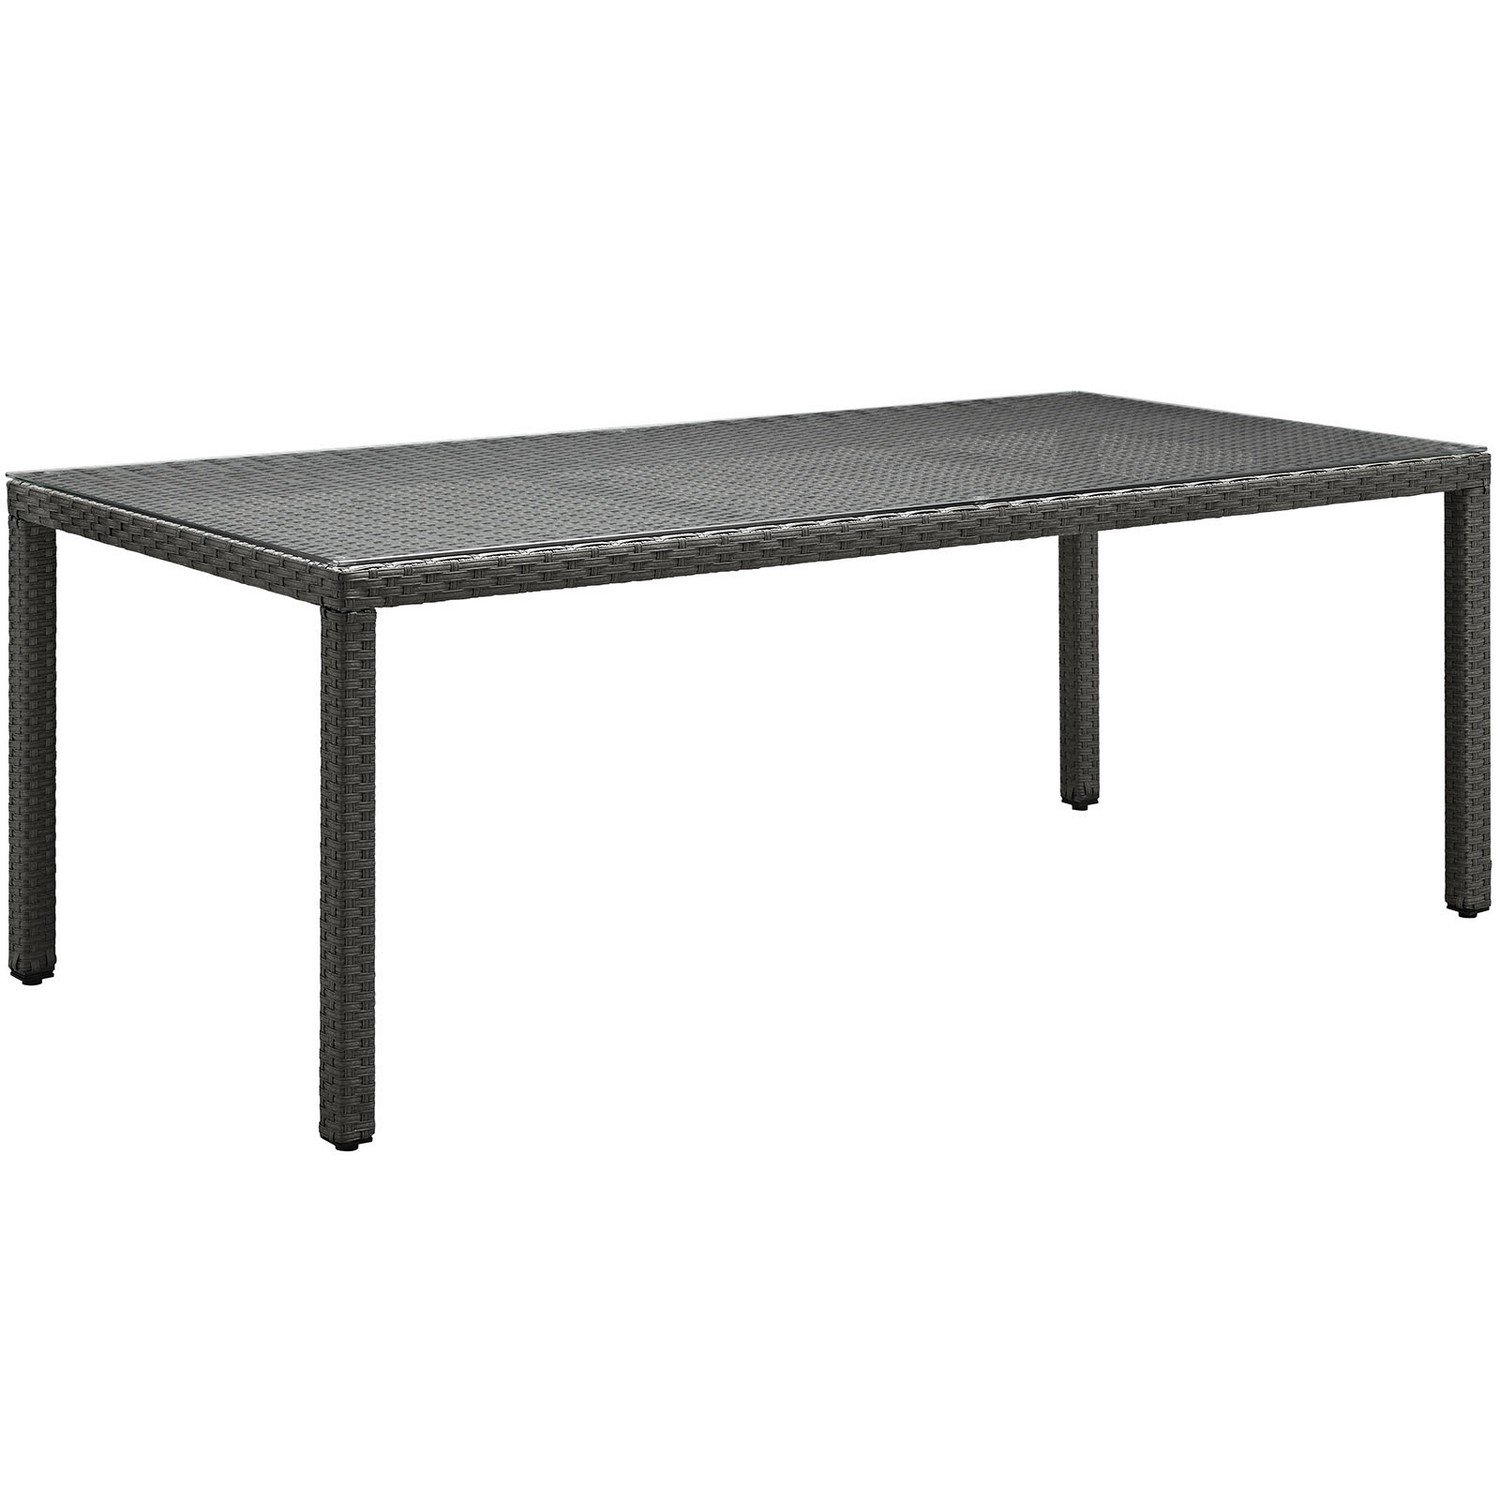 Modway Sojourn 82-inch Outdoor Patio Dining Table - Chocolate